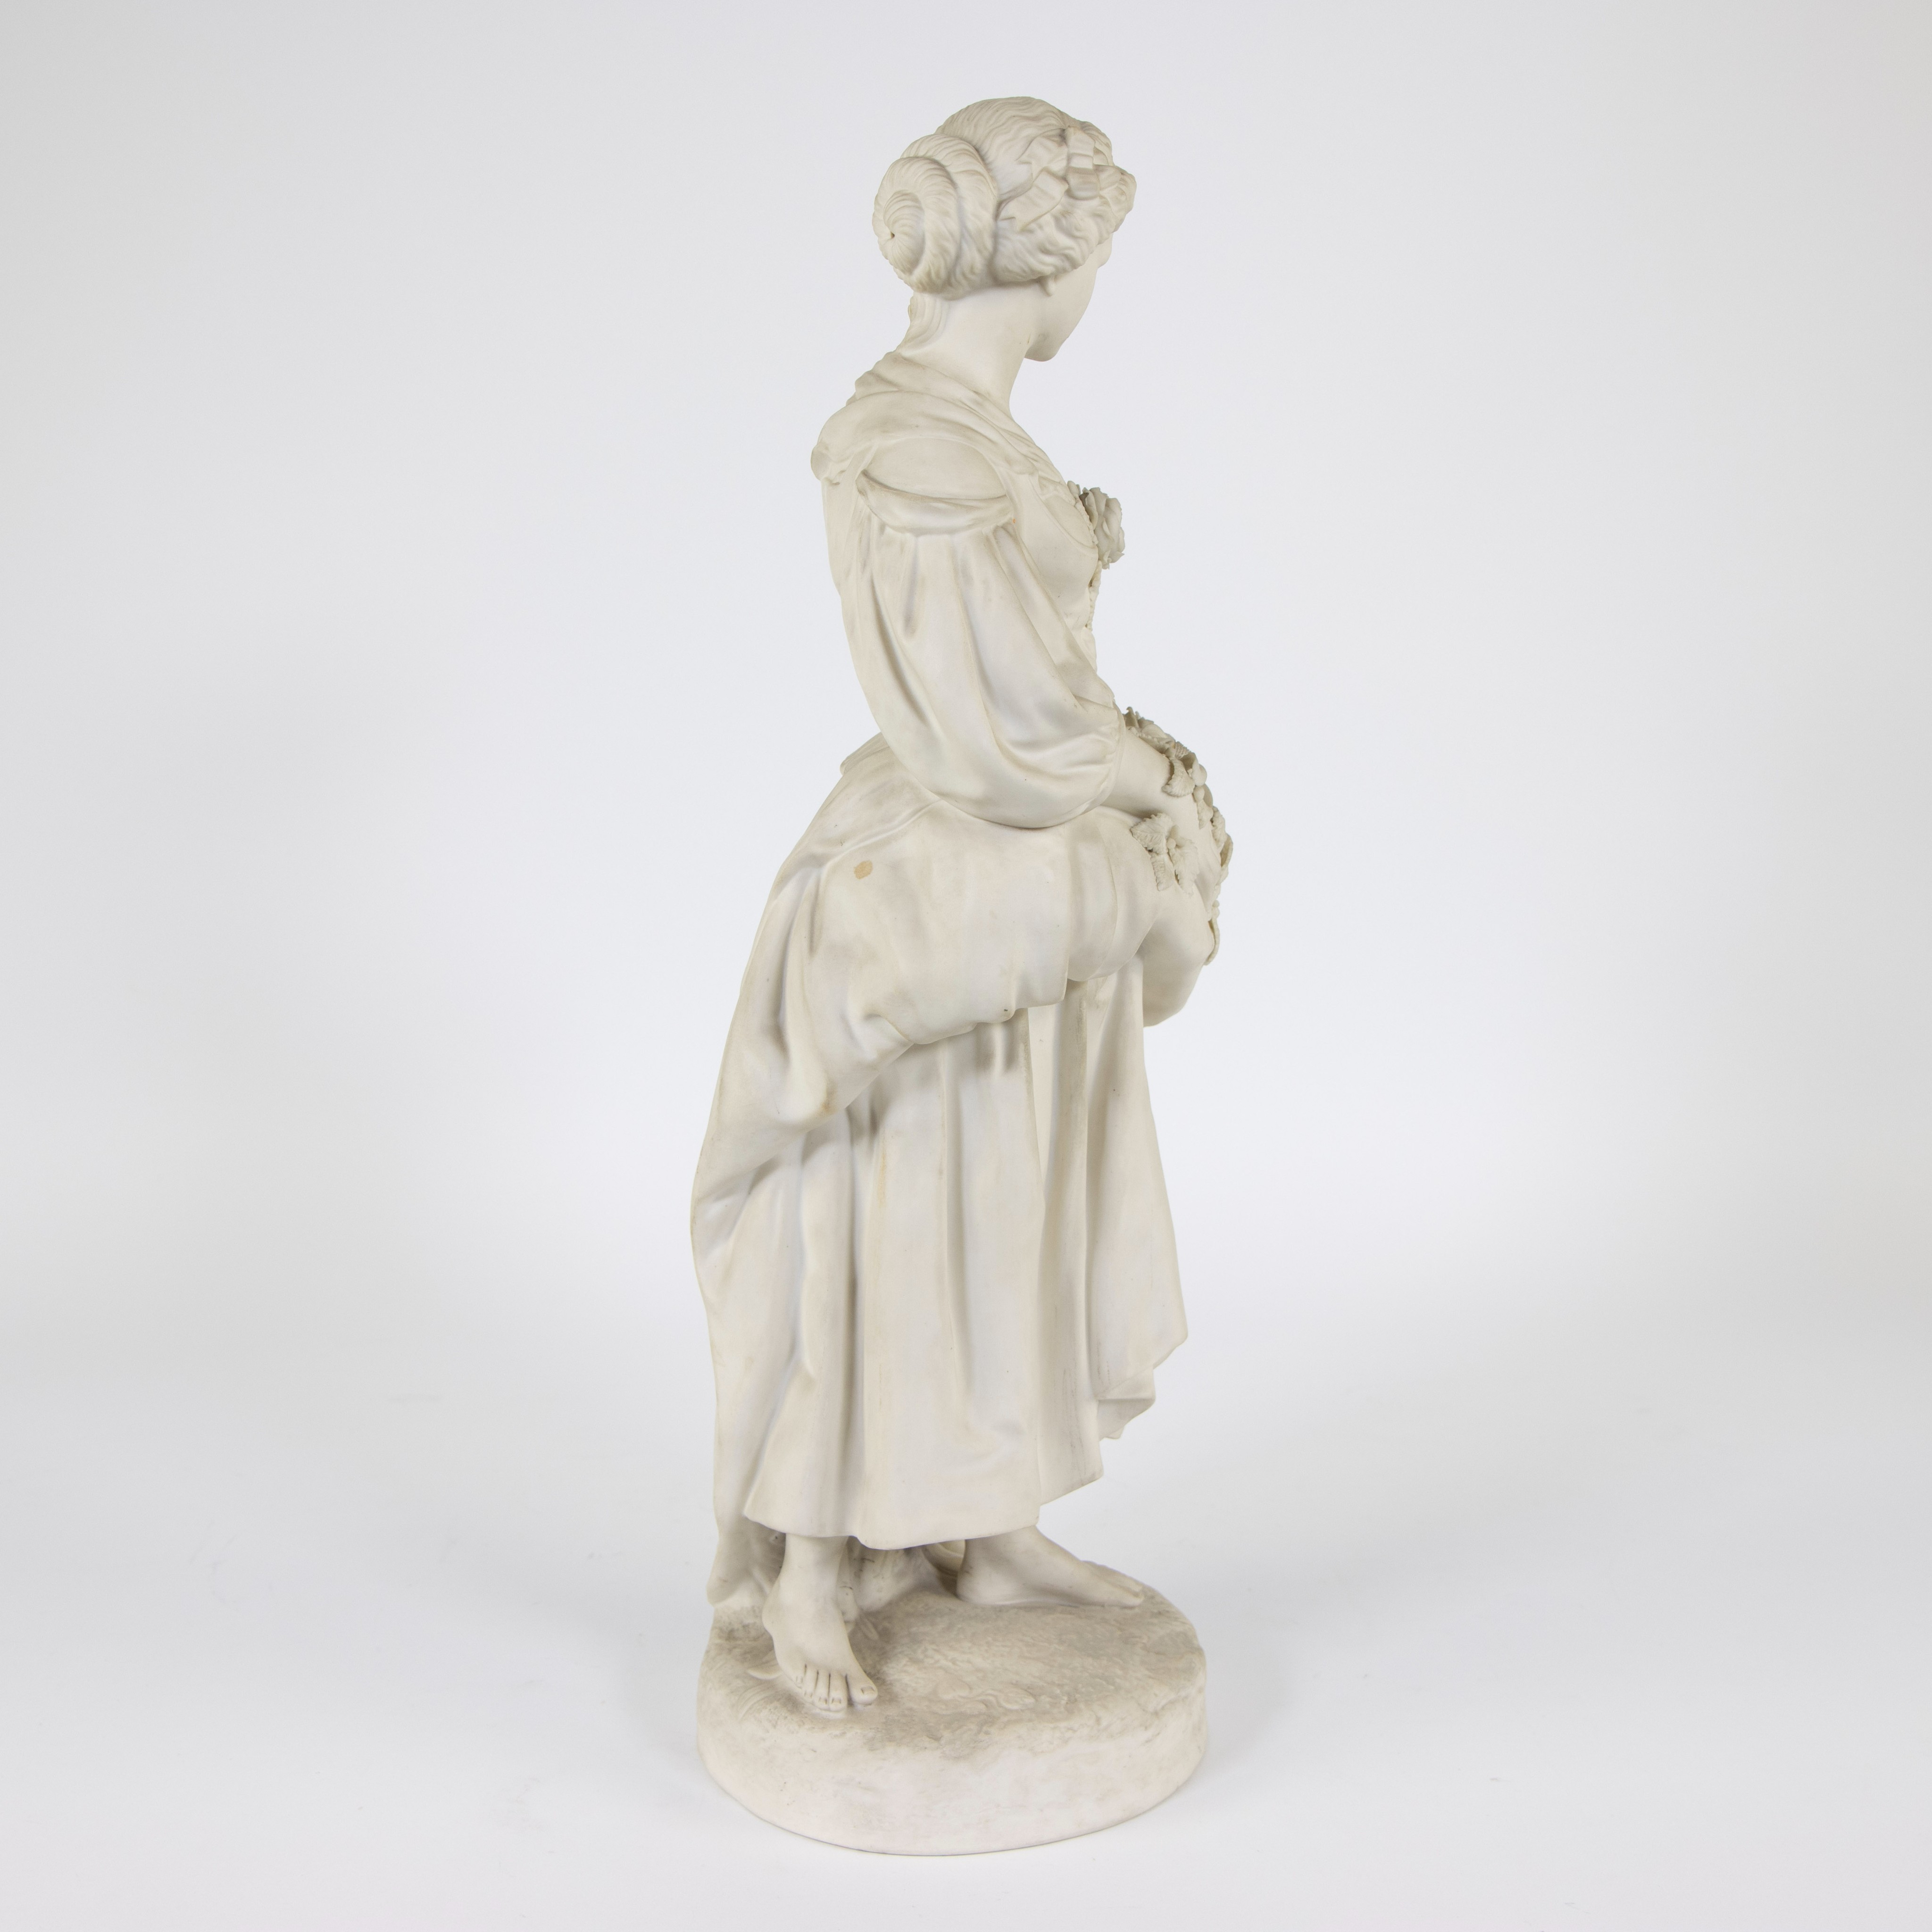 Biscuit figurine of a lady with flowers and jug - Image 4 of 5